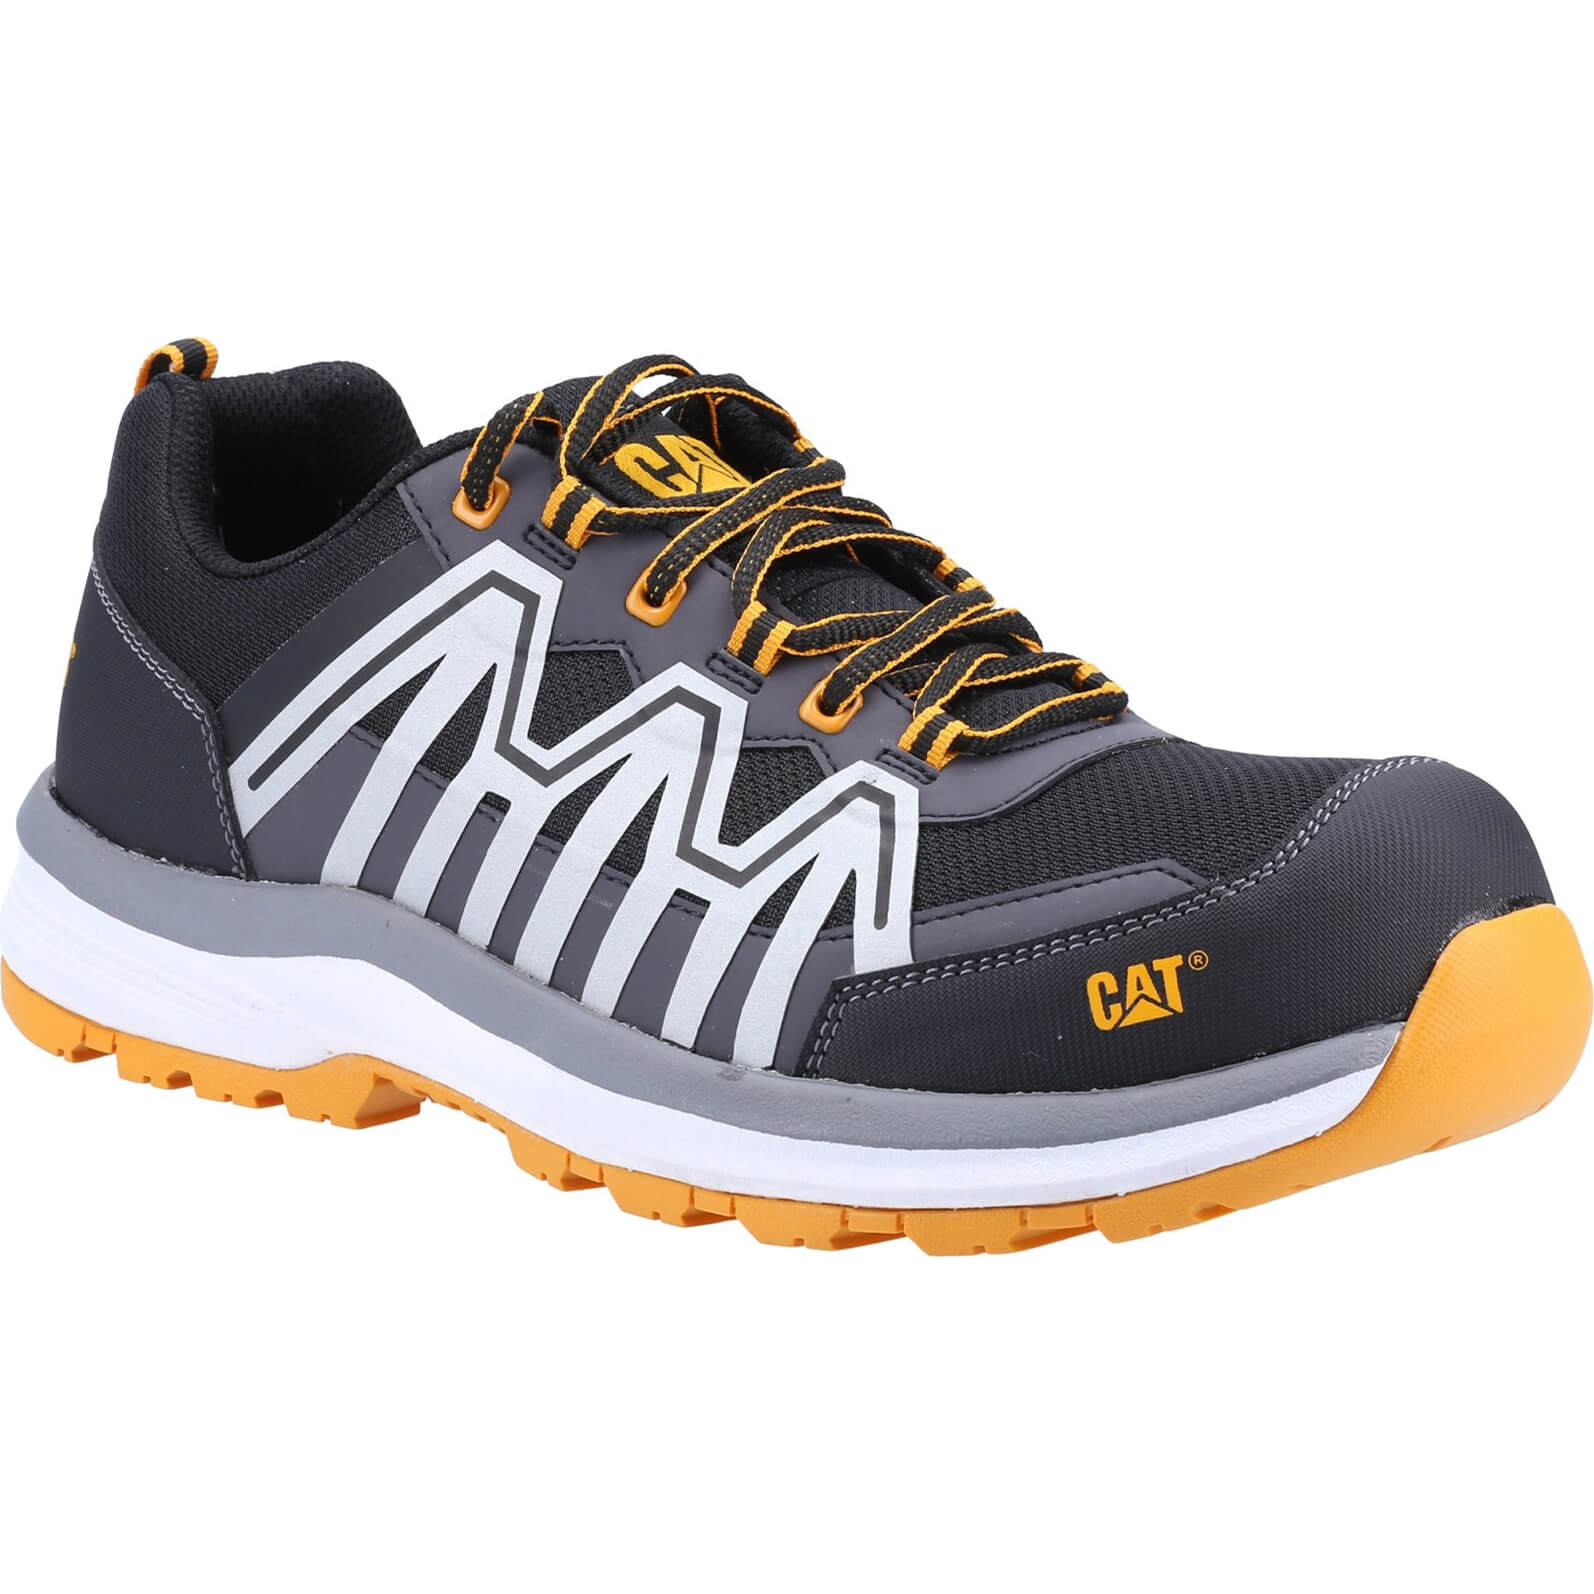 Image of Caterpillar Mens Charge S3 Safety Trainer Orange Size 9